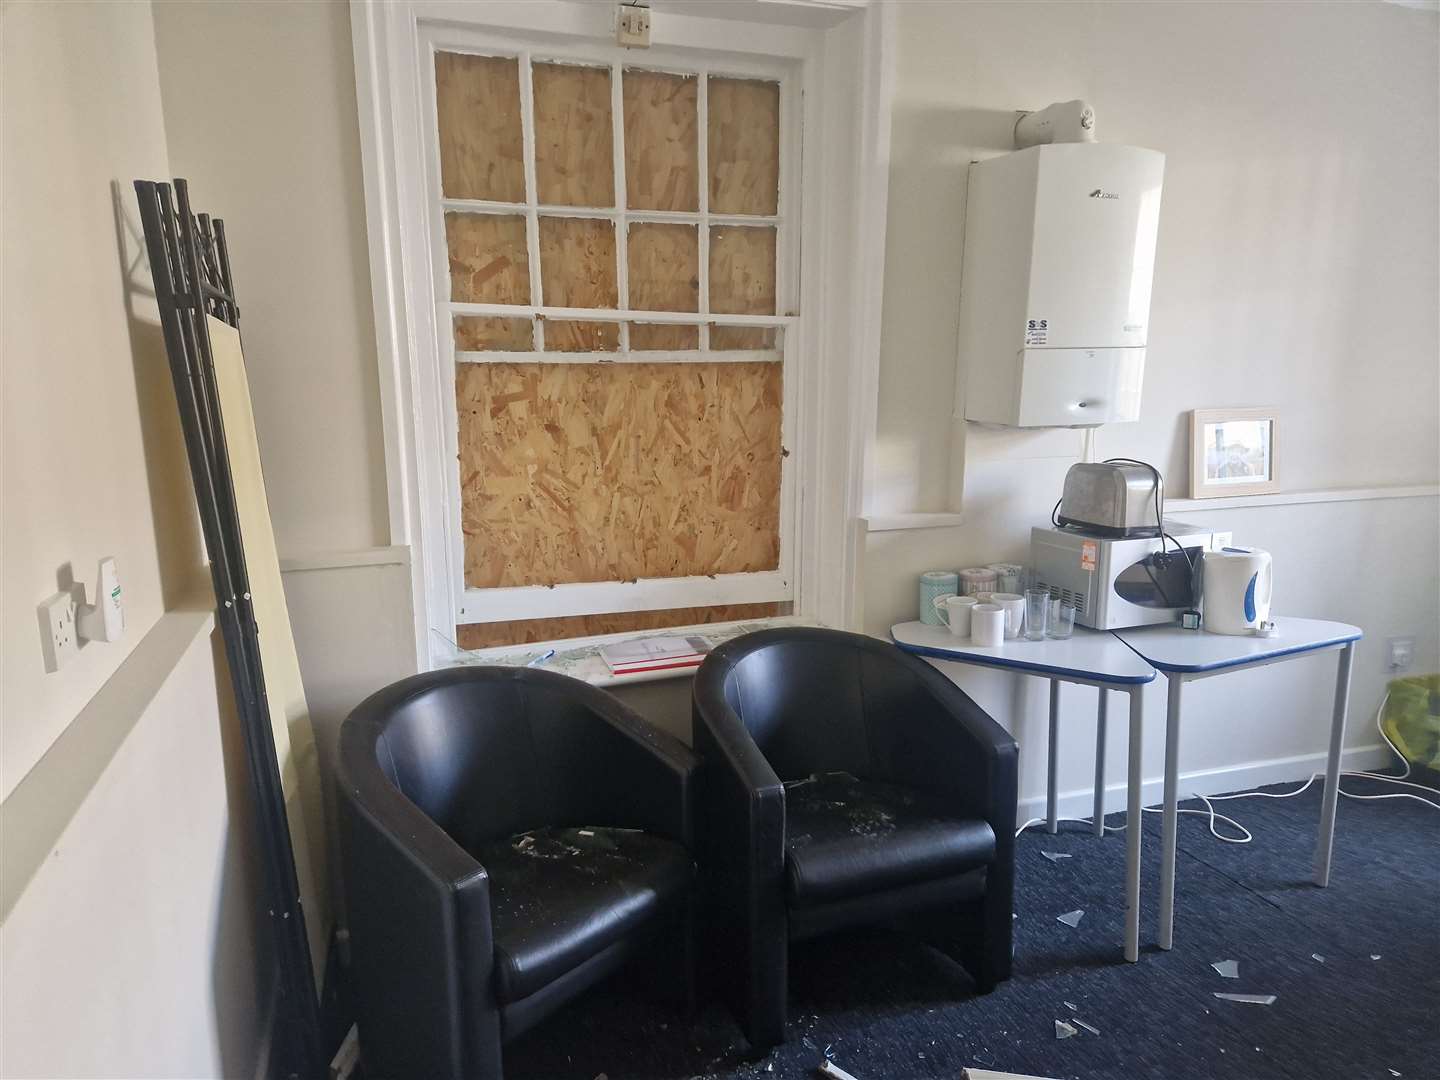 The intruder broke a sash window at Rosemary House. Picture: Age UK